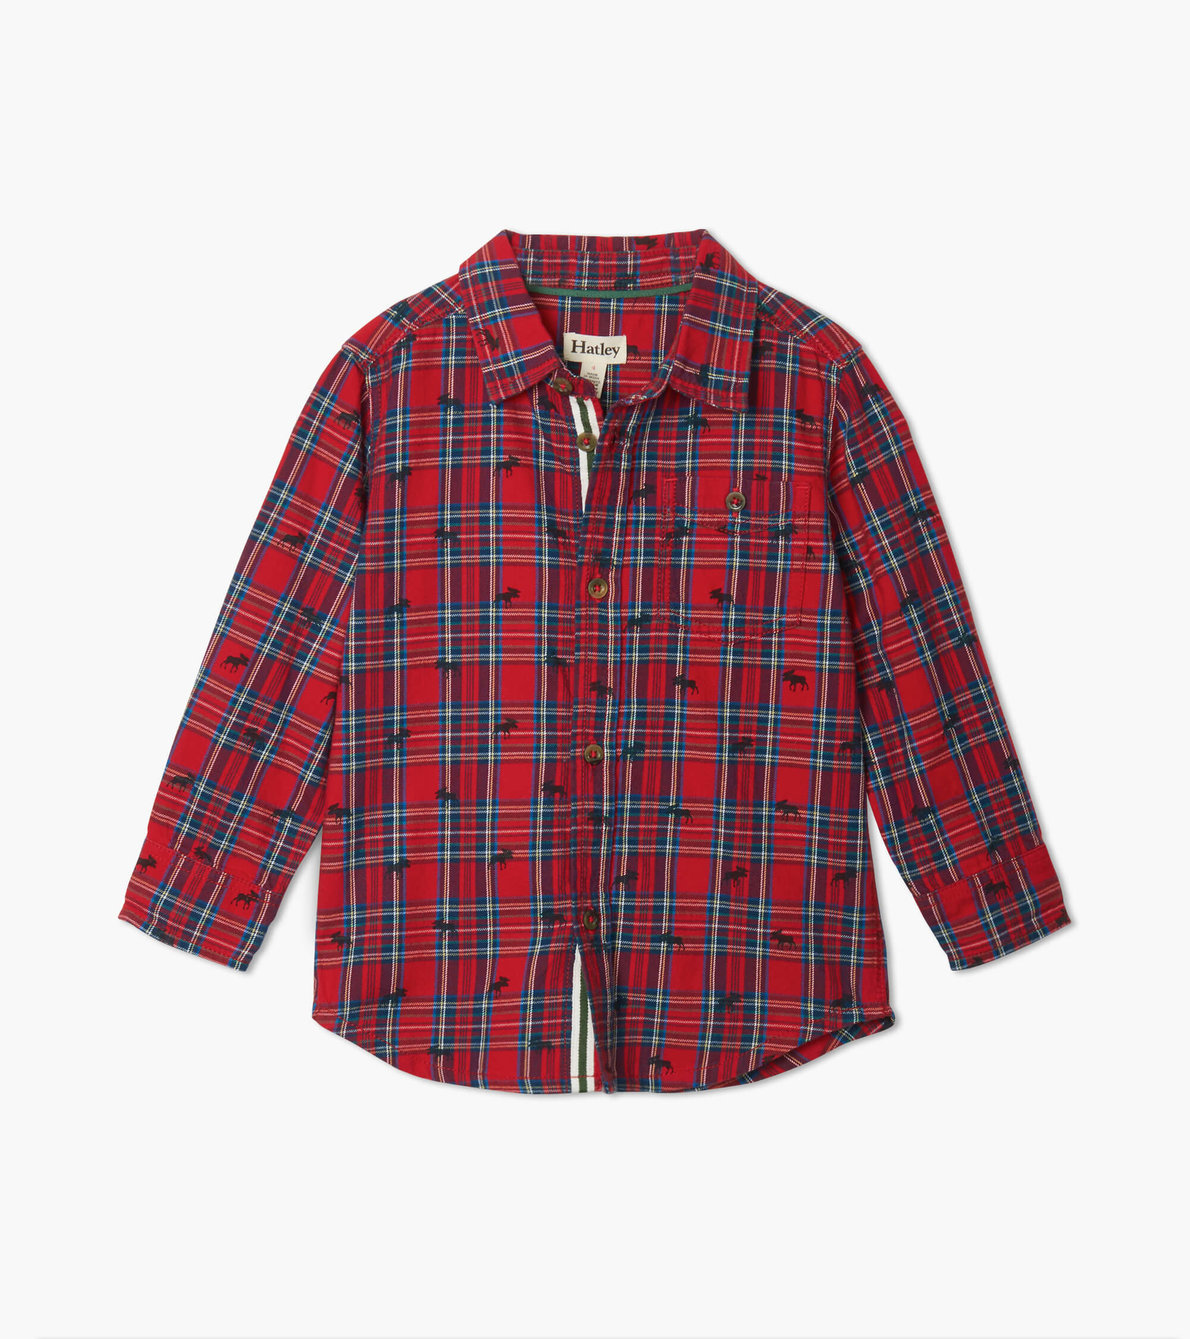 View larger image of Holiday Plaid Moose Button Down Shirt